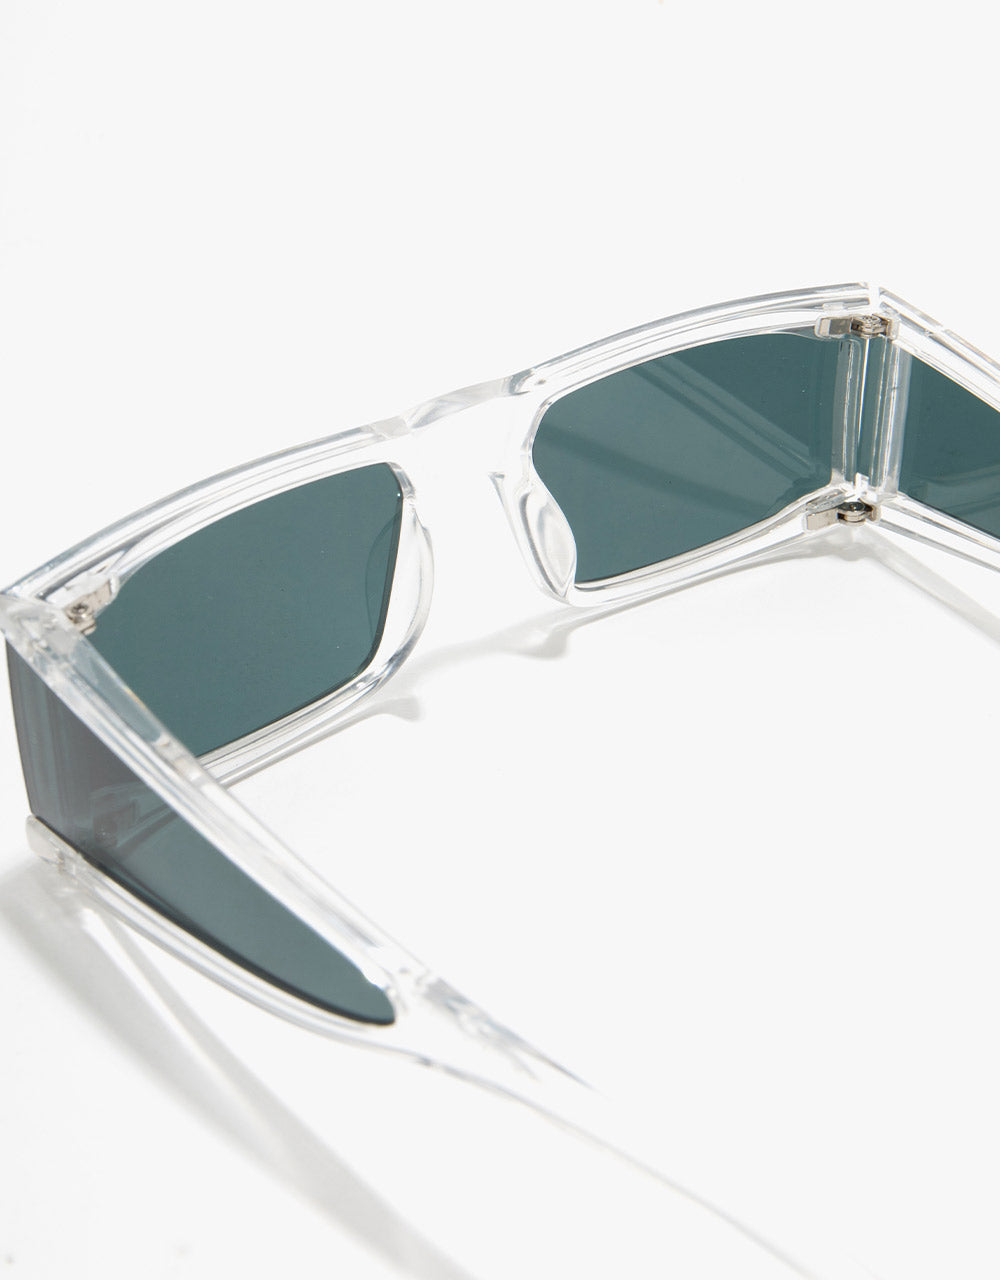 Route One Sting Sunglasses - Clear Smoke